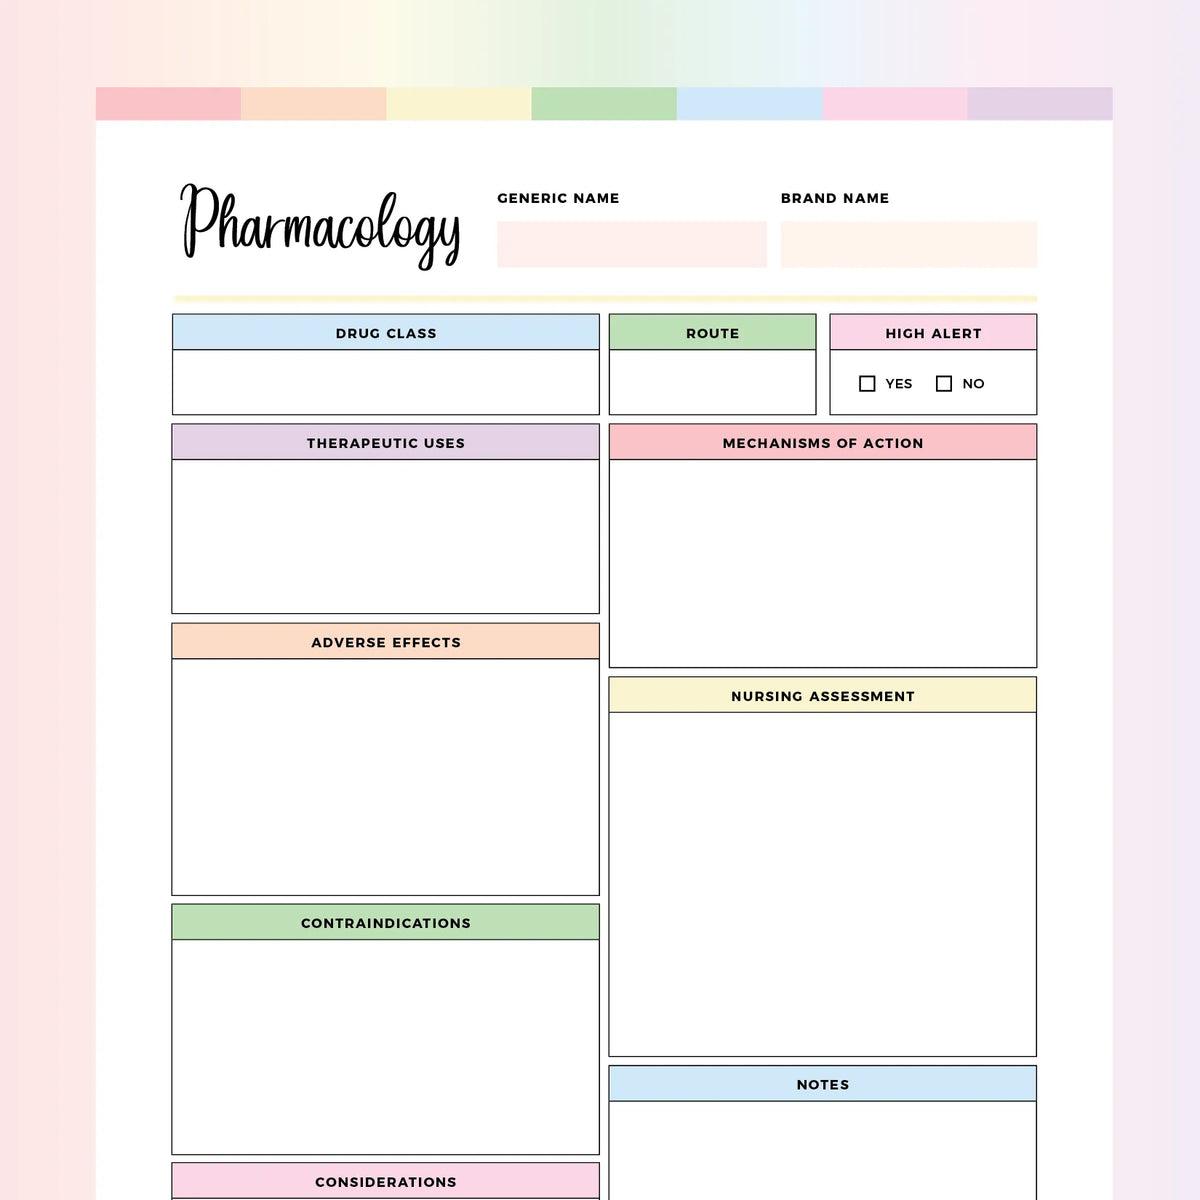 pharmacology-template-printable-instant-download-pdf-a4-and-us